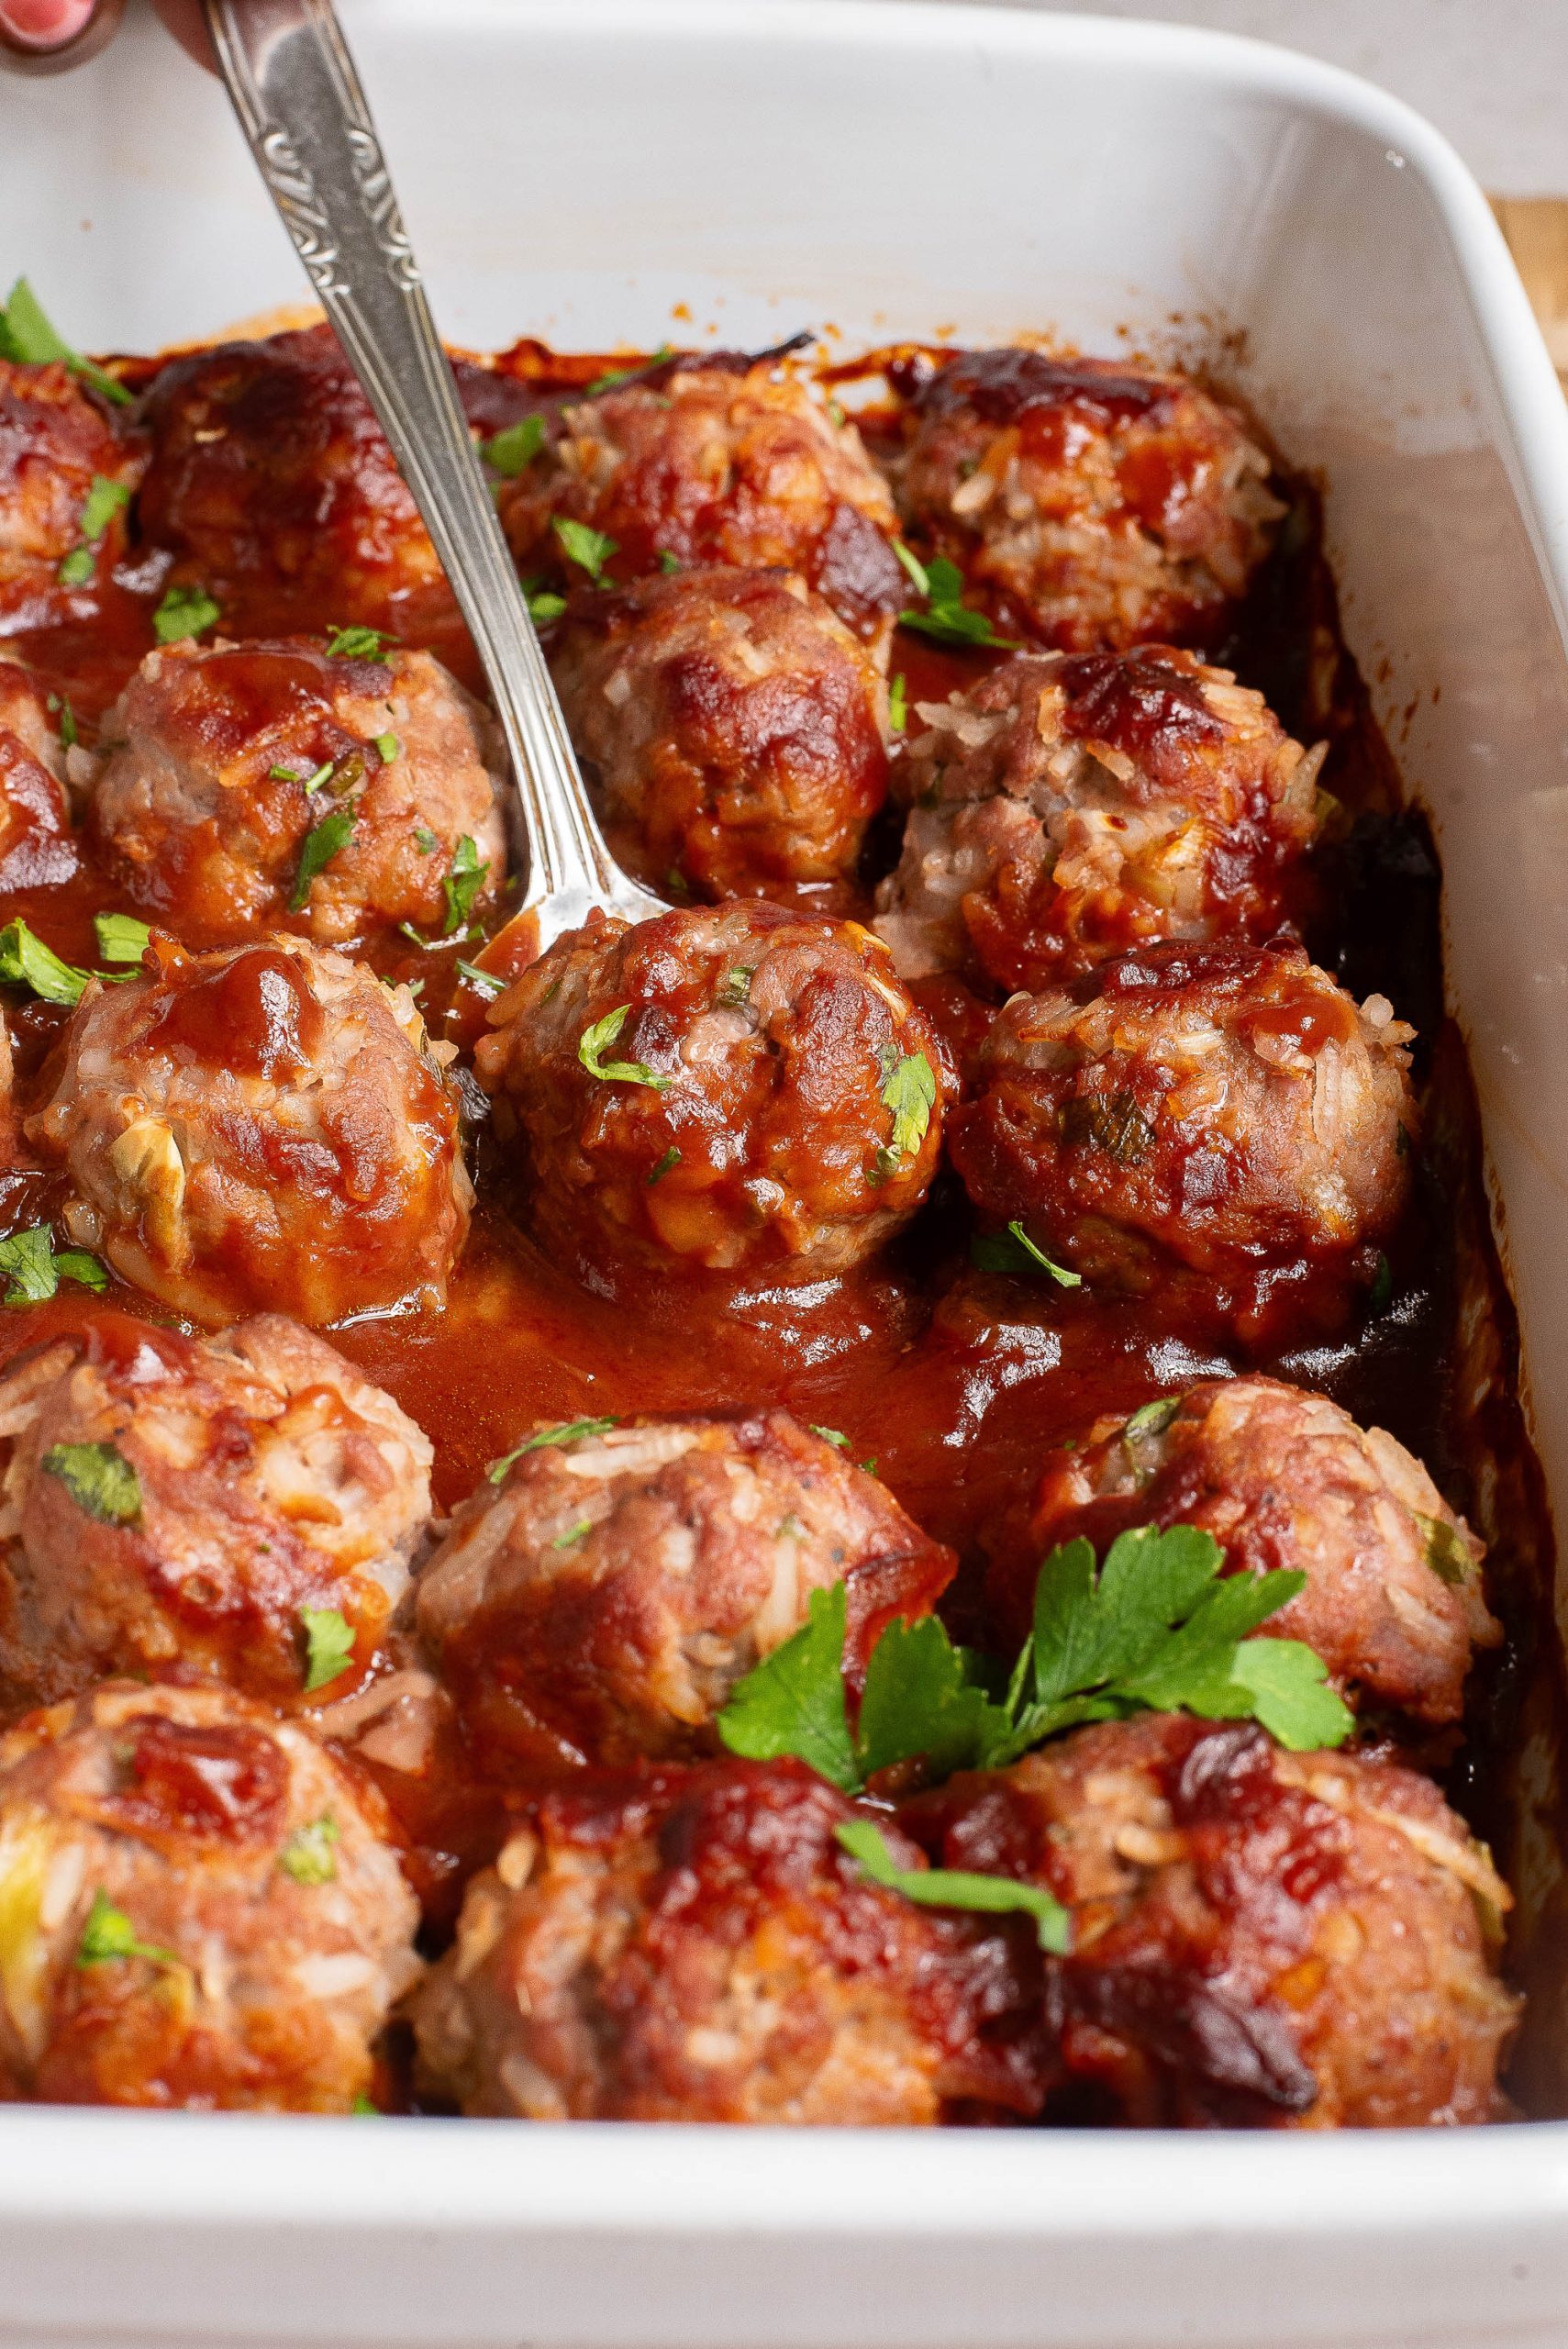 Meatballs in a baking dish with a spoon.